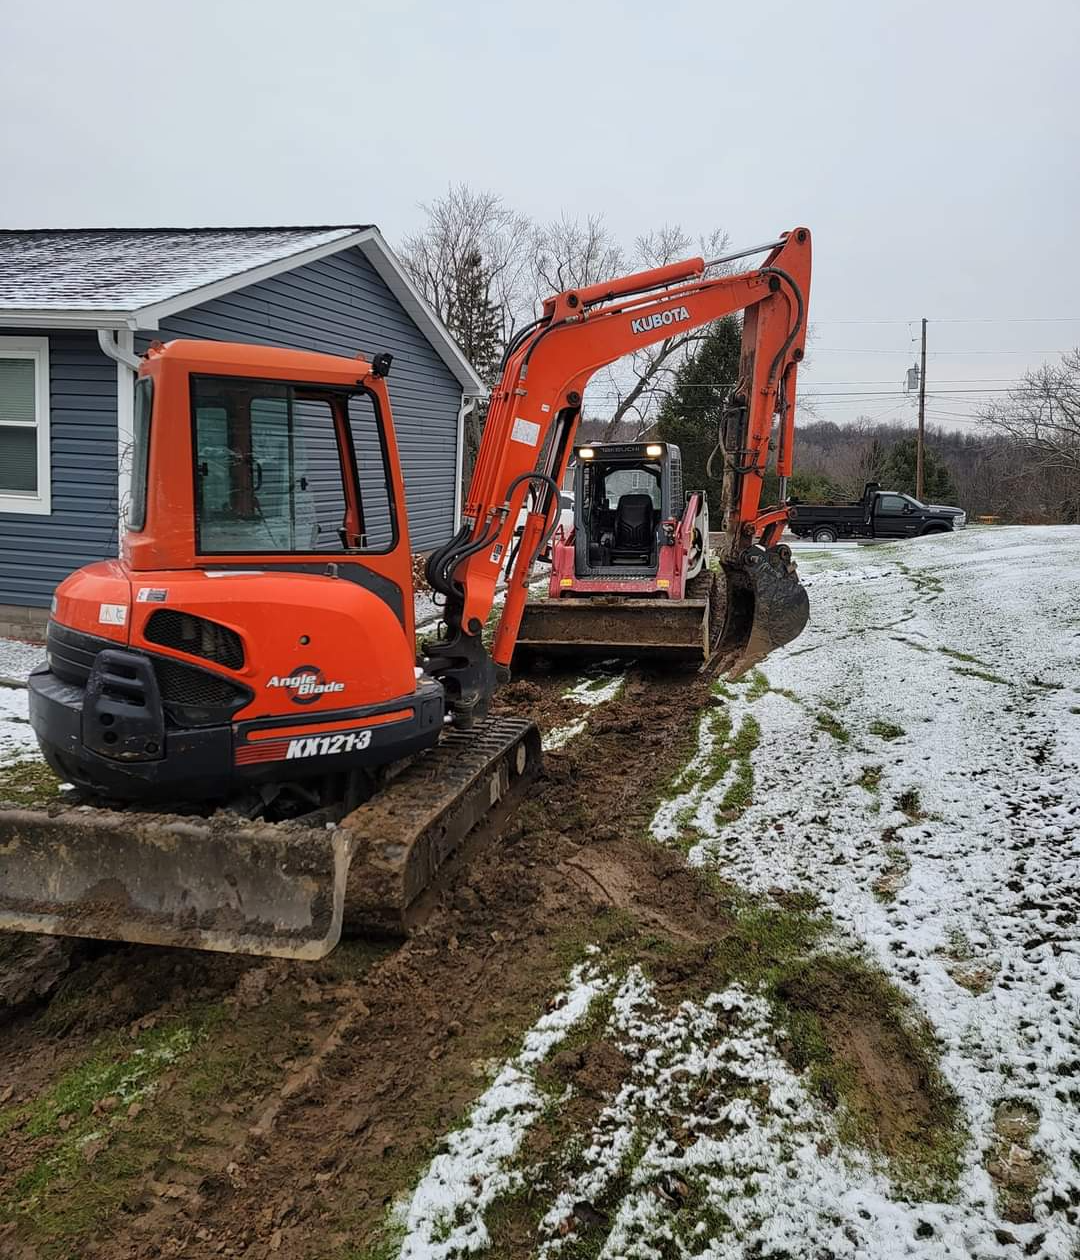 an orange kubota excavator sits in front of a house